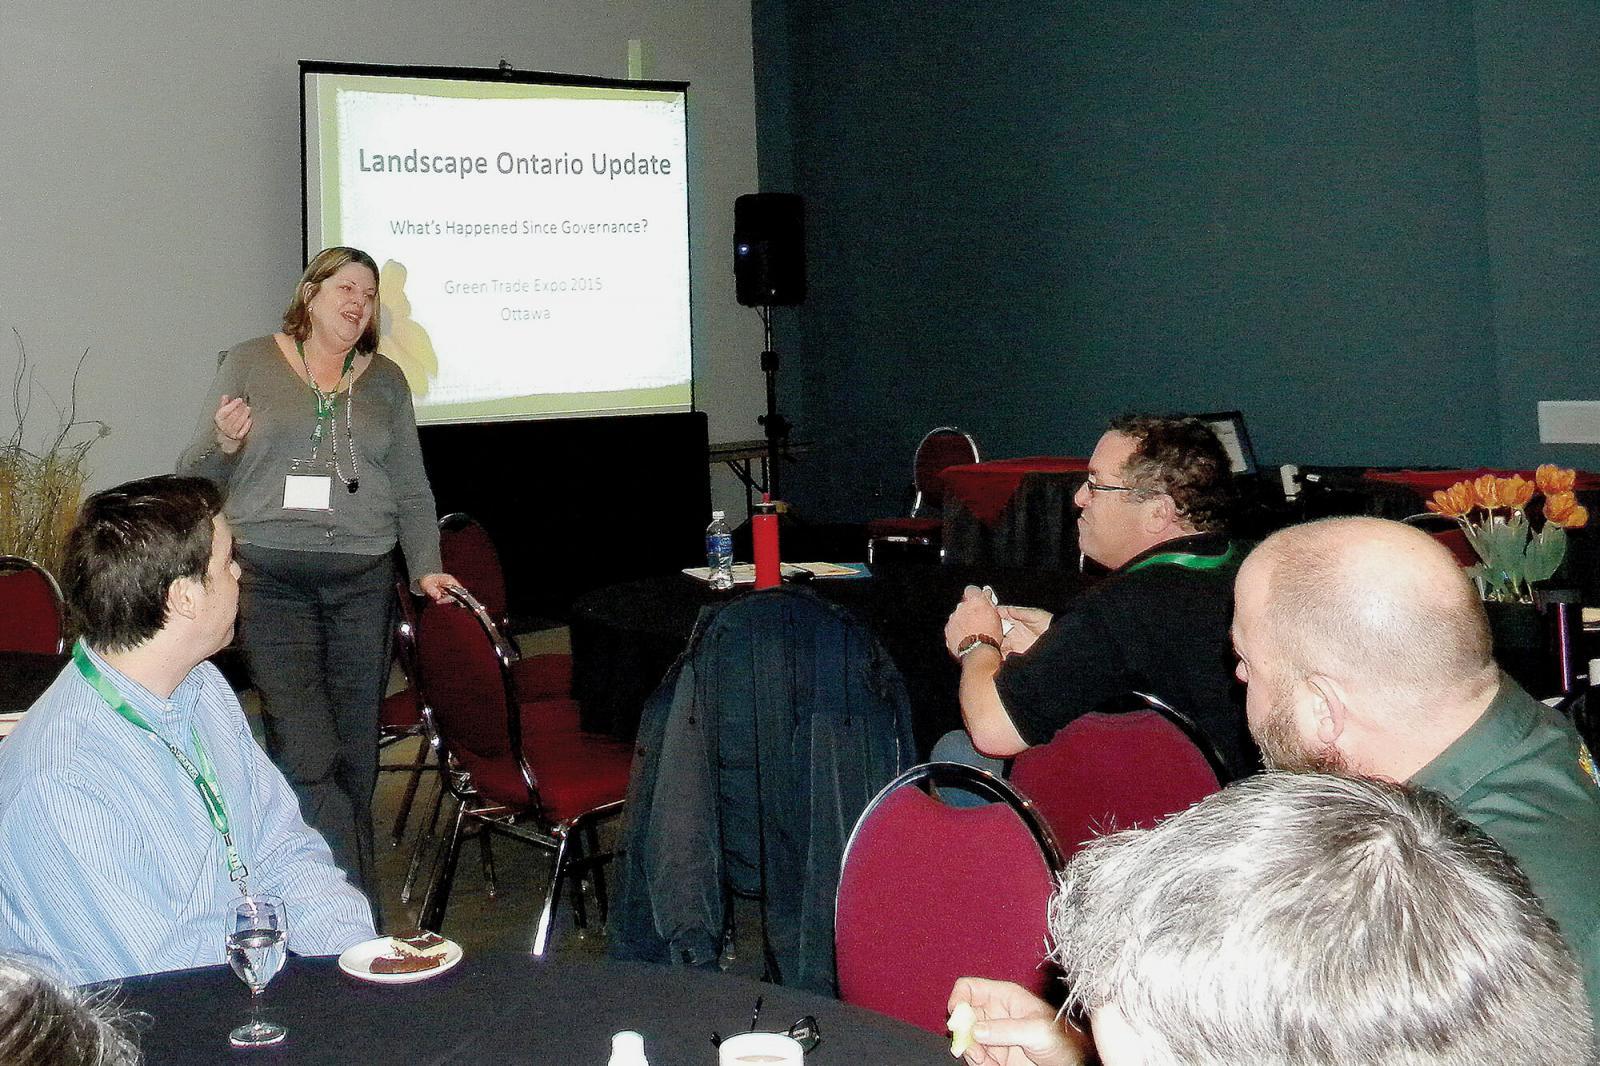 Lexi Dearborn leads a mini-governance meeting at the end of GreenTrade Expo.